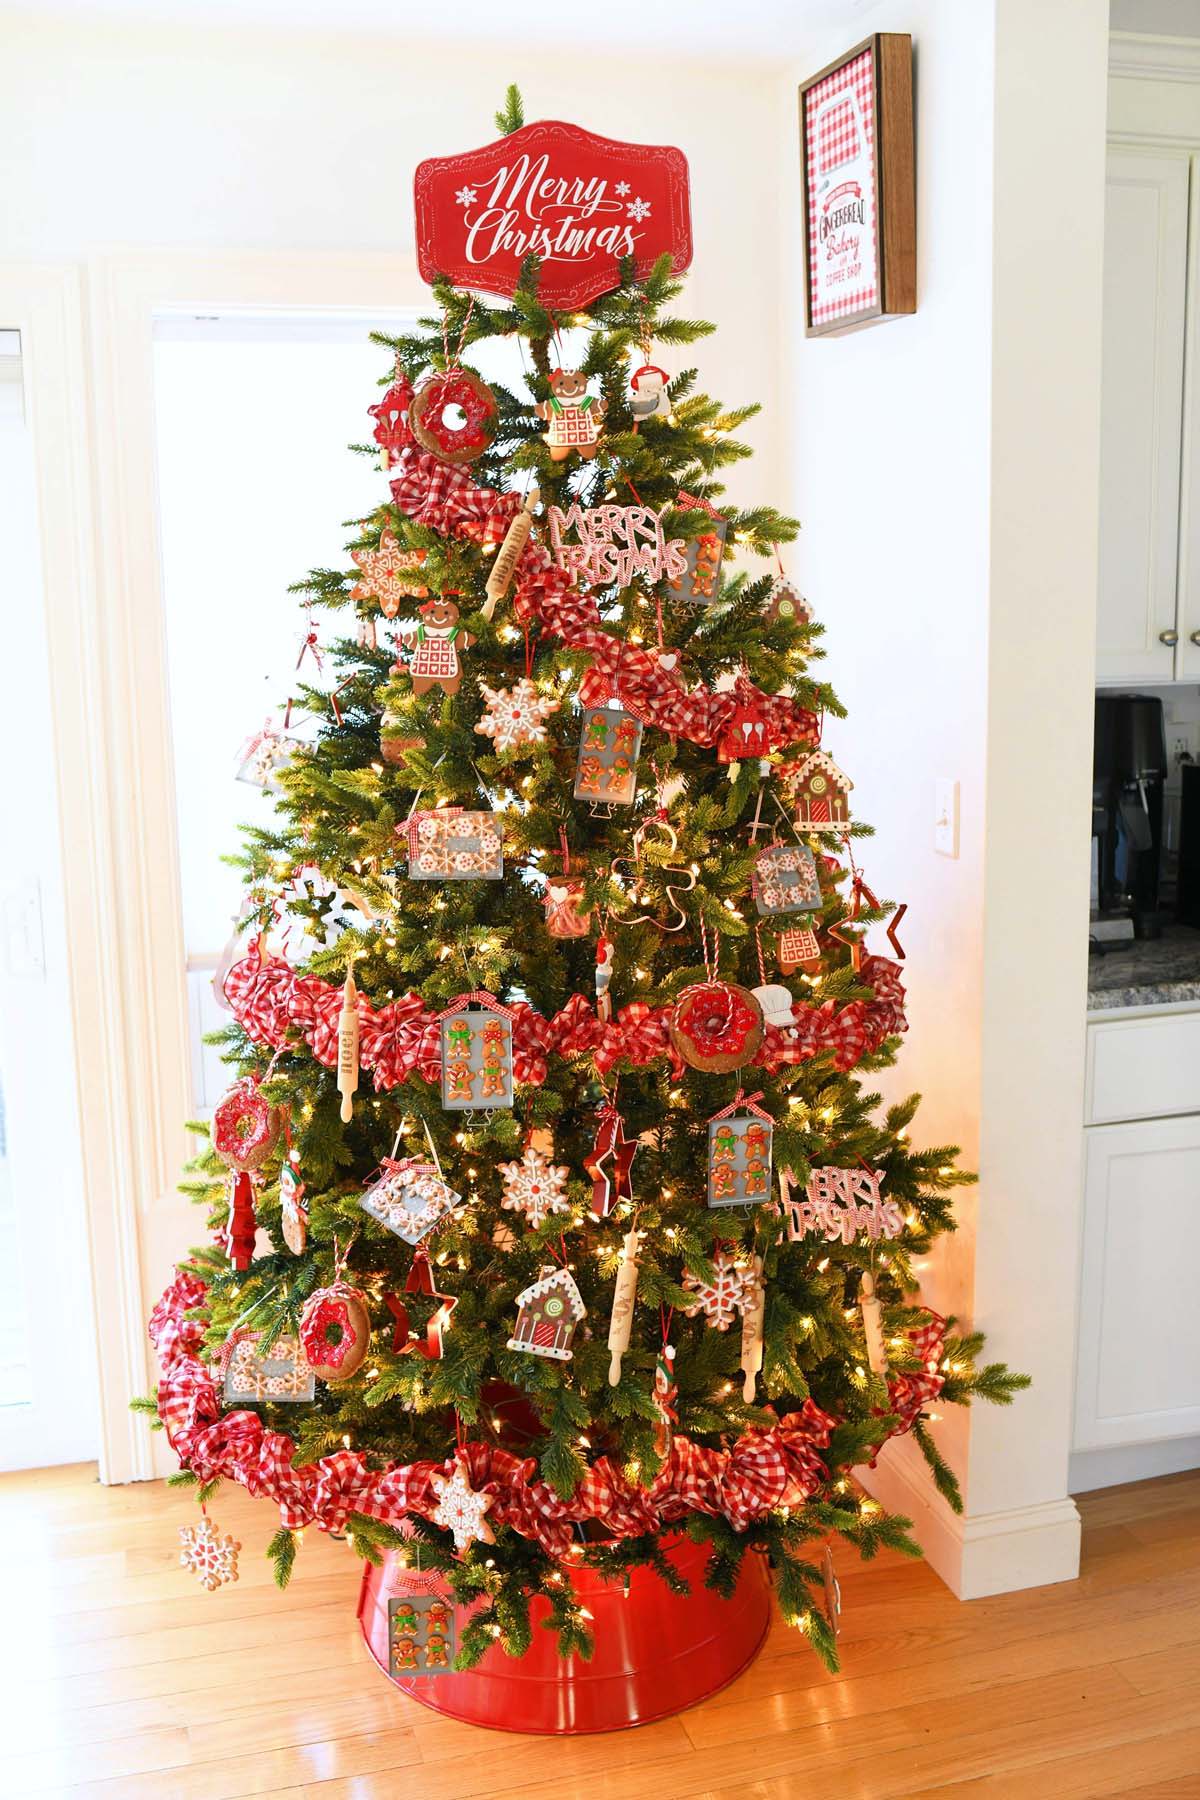 How to decorate your Christmas tree